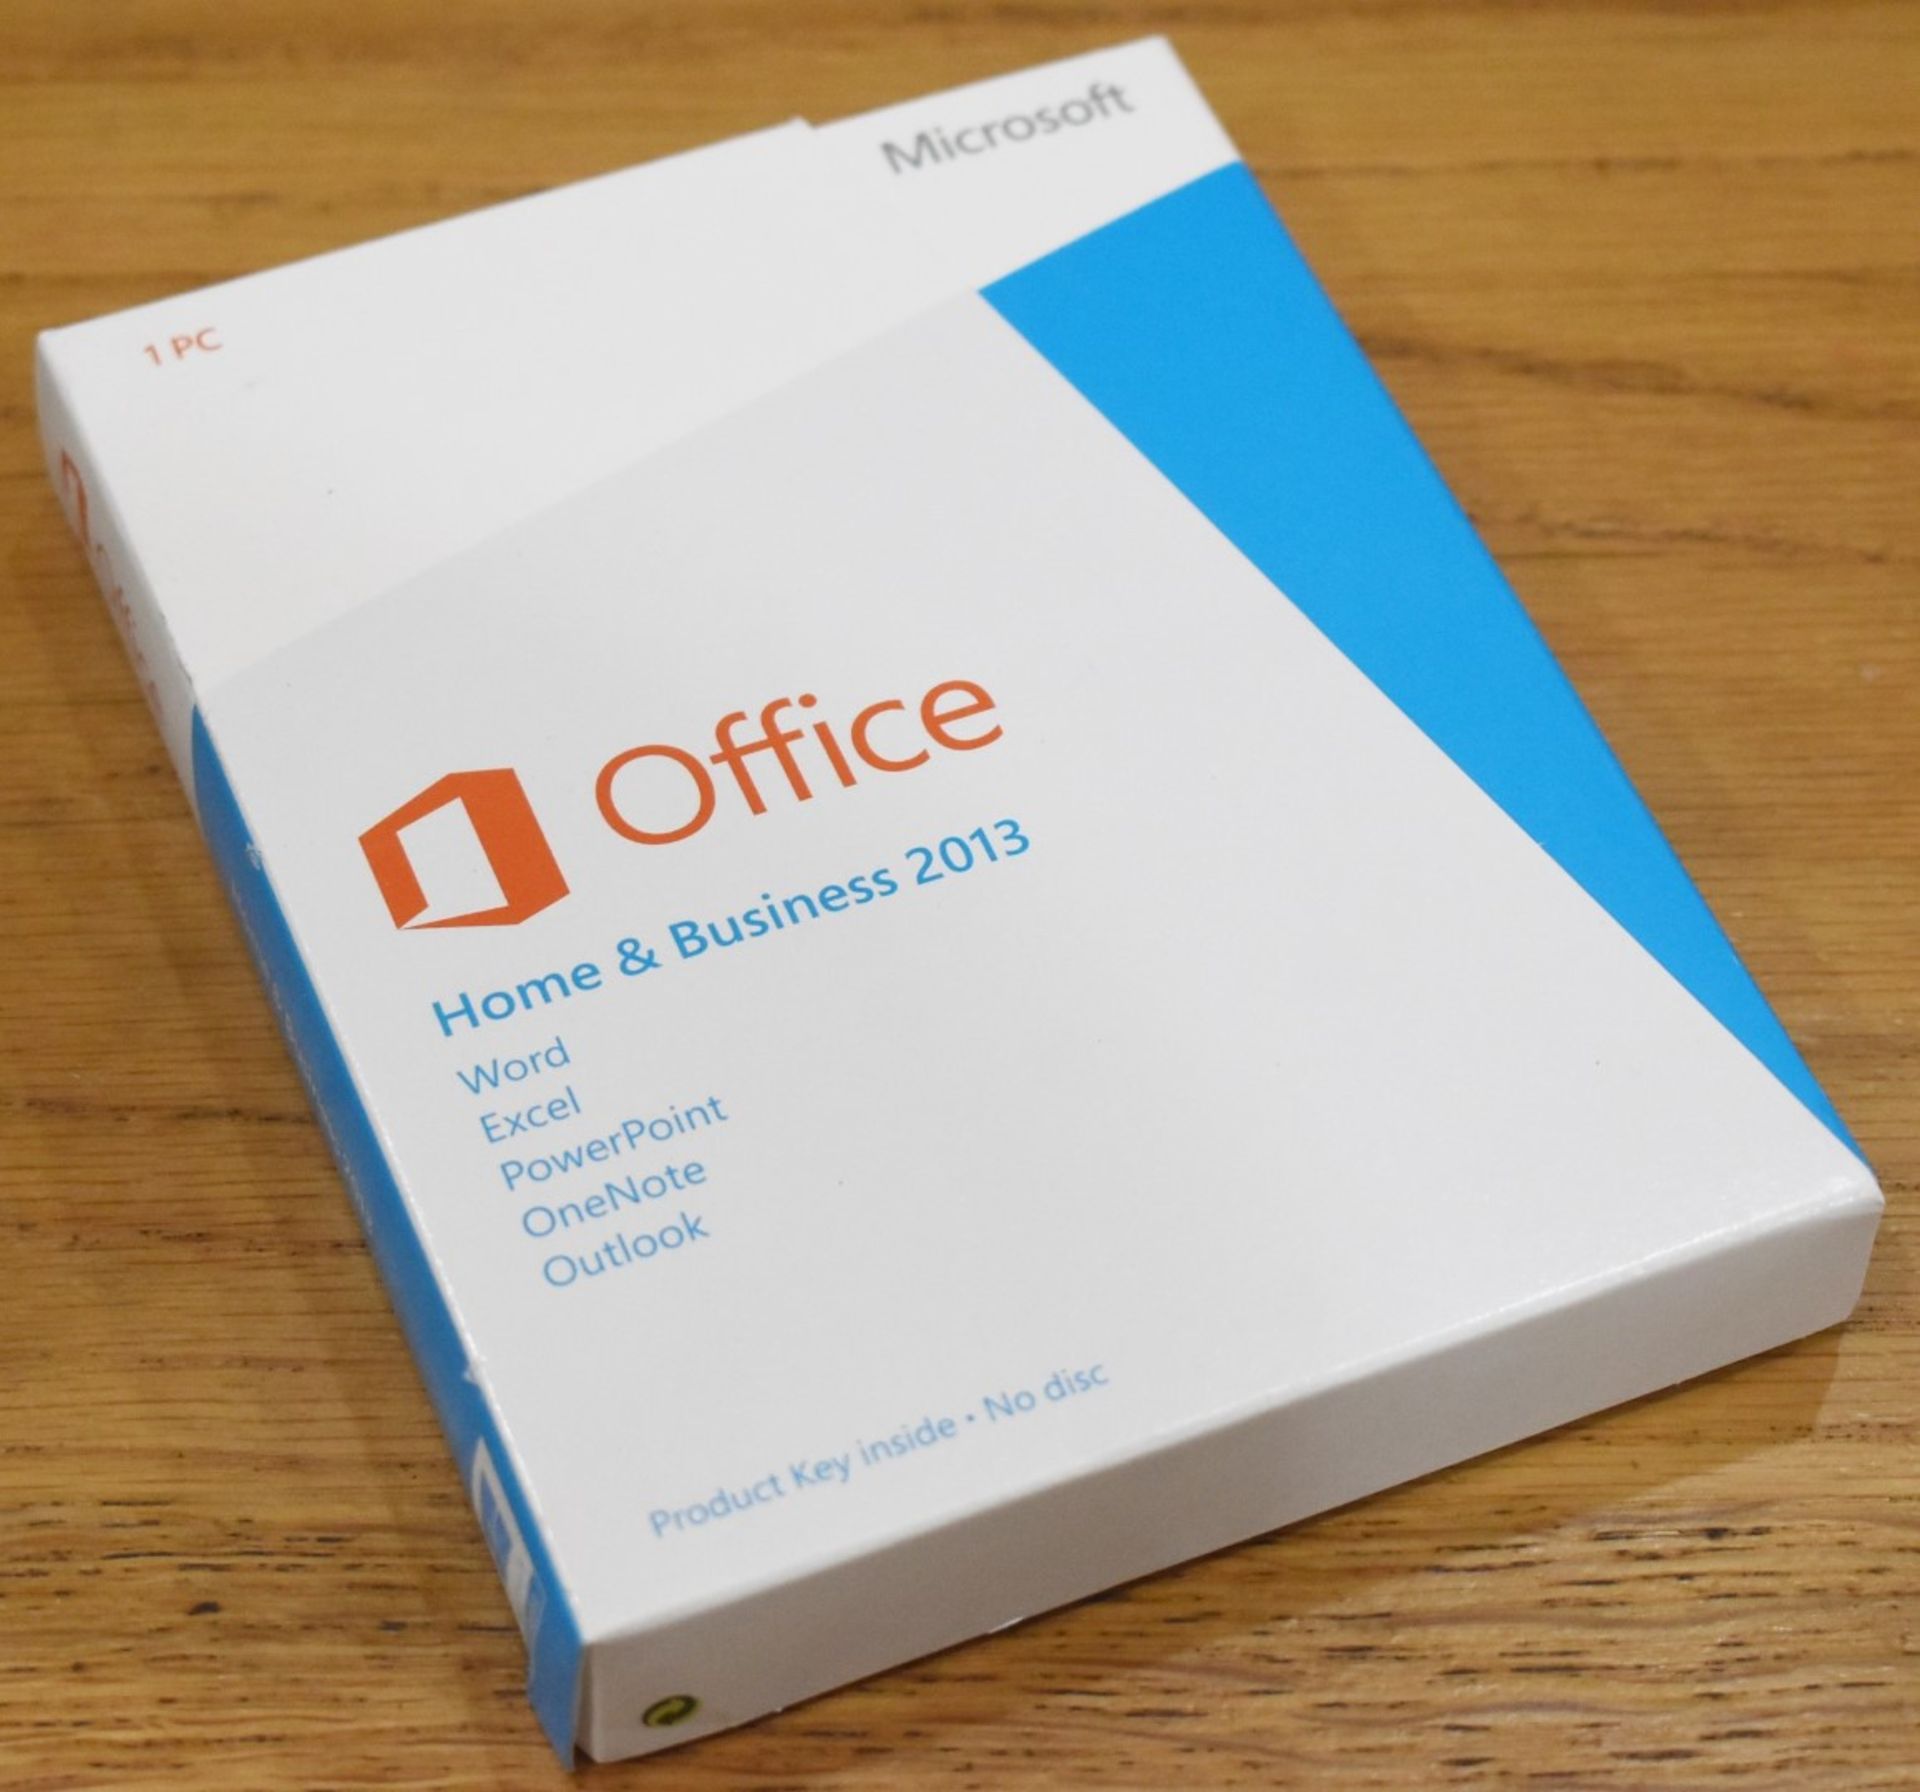 1 x Microsoft Office 2013 Home and Business - Activation Key Card With Original Box - Ref: CG -